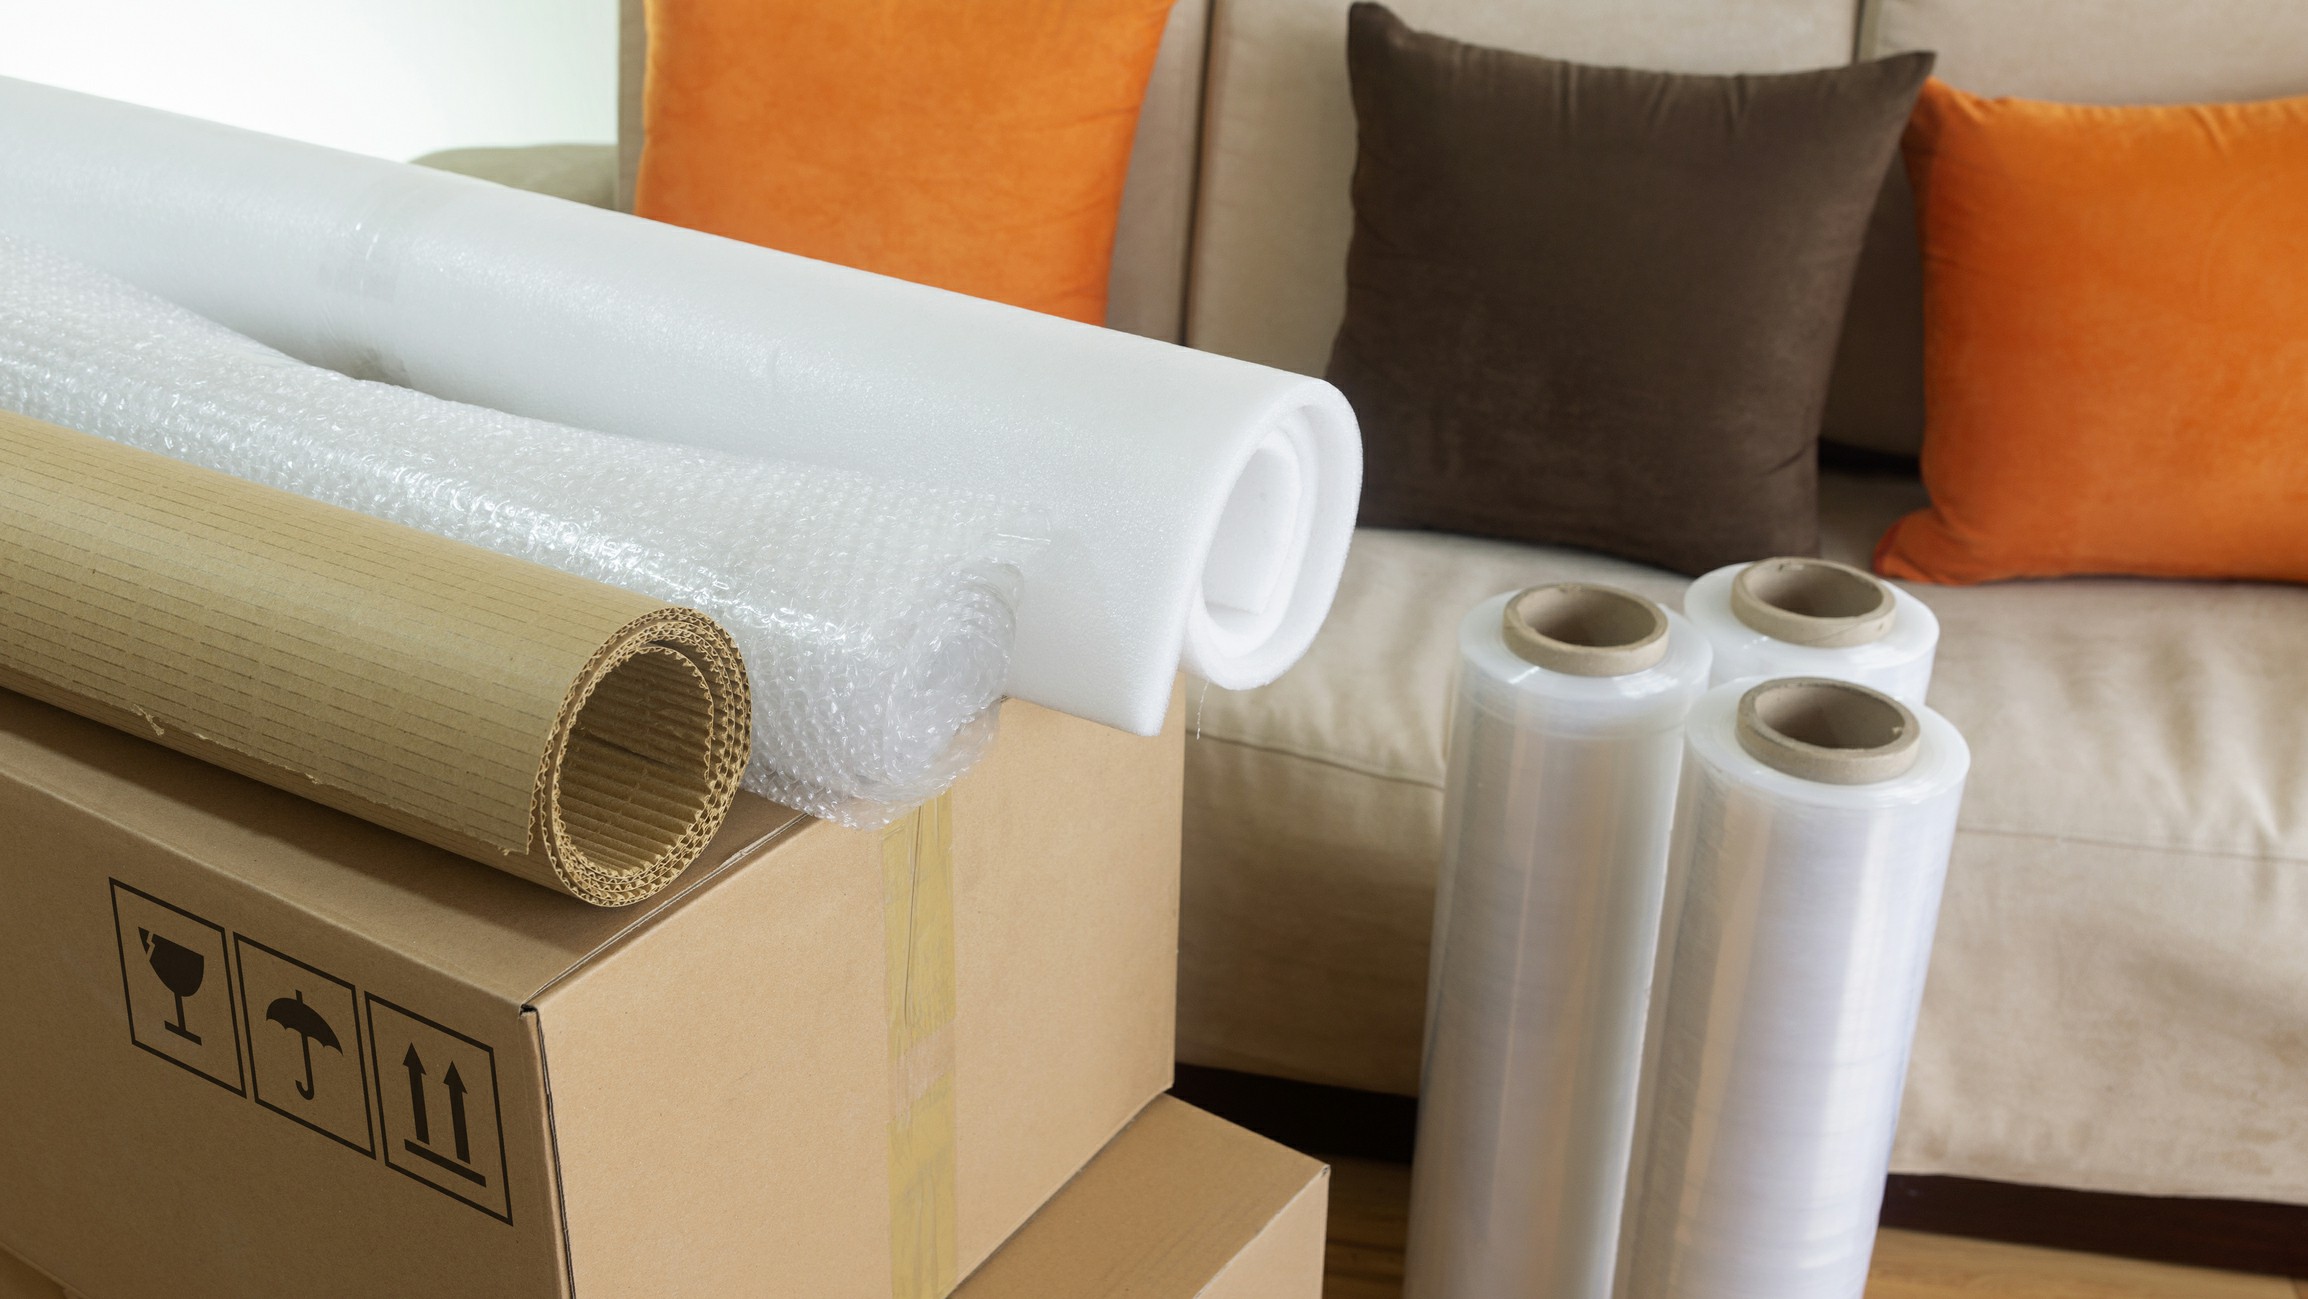 Understanding Different Types of Packing Materials